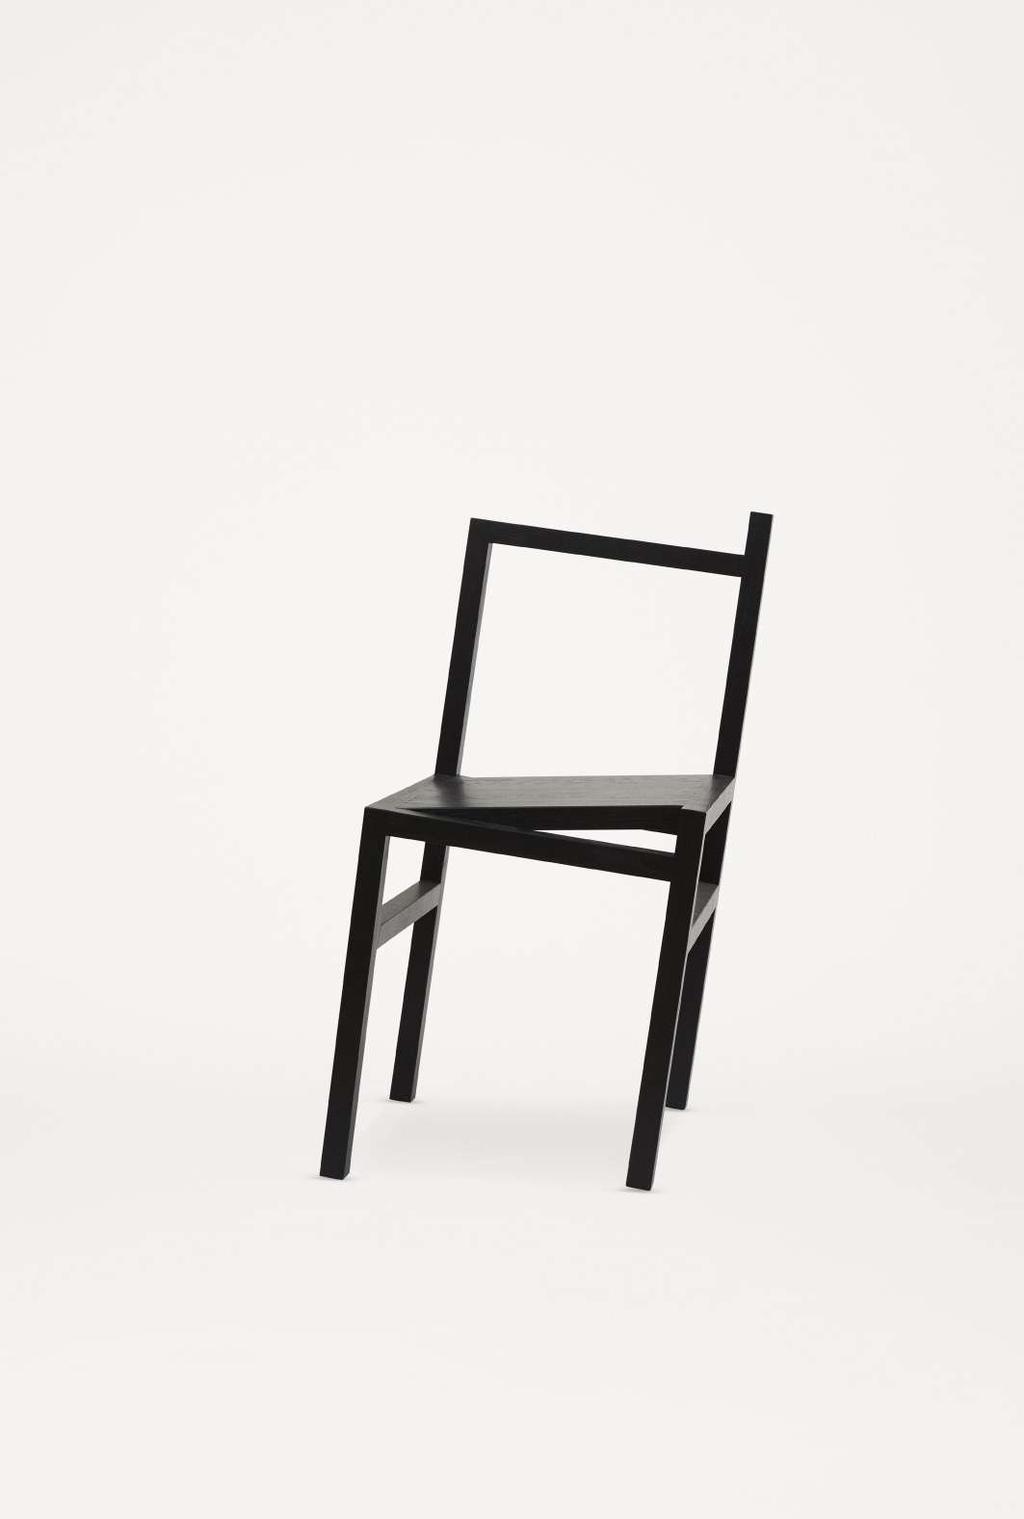 540 400 795 450 9.5 Design Rasmus Bækkel Fex Year 2009 Typology Chair Collection Signature Origin Sweden Material Ash Finish Stained black, natural ash Product 9.5 stained black 9.5 Item No. 9.5 natural ash 9.